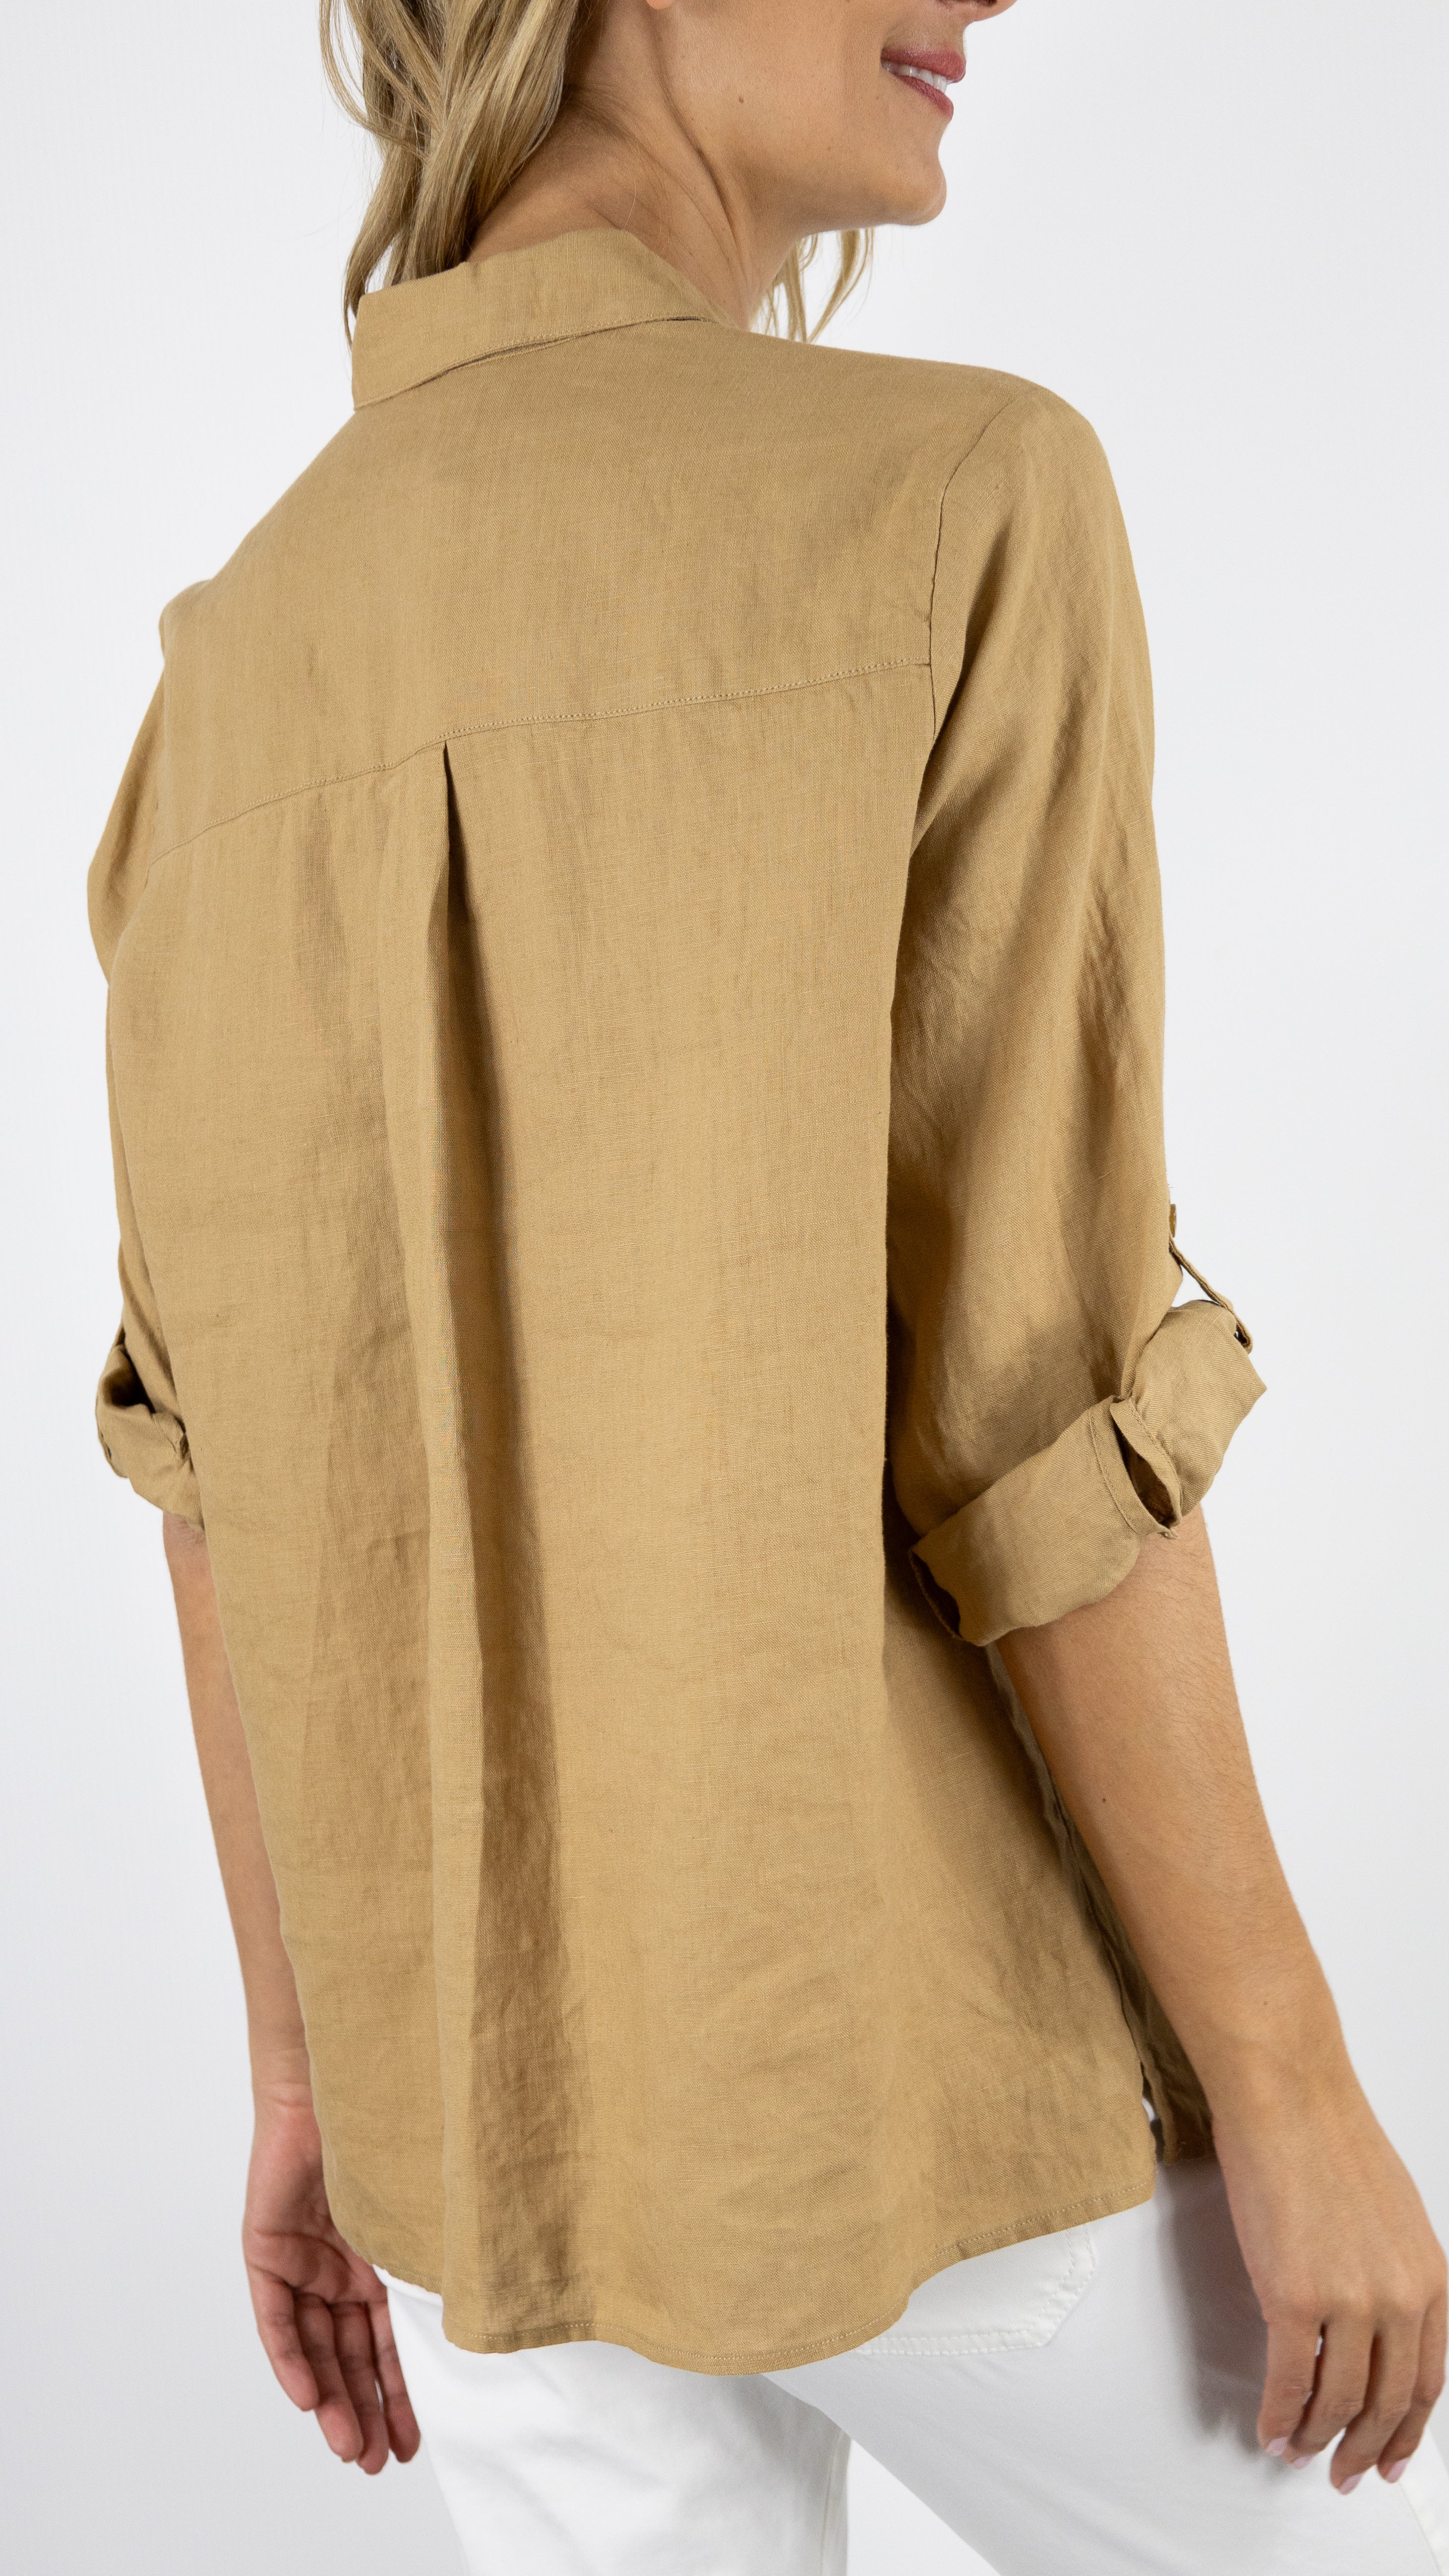 CHEMISE EN LIN MANCHES 3/4 TONI 1438/02 71027 TABAC CAMEL #color_740/TABAC